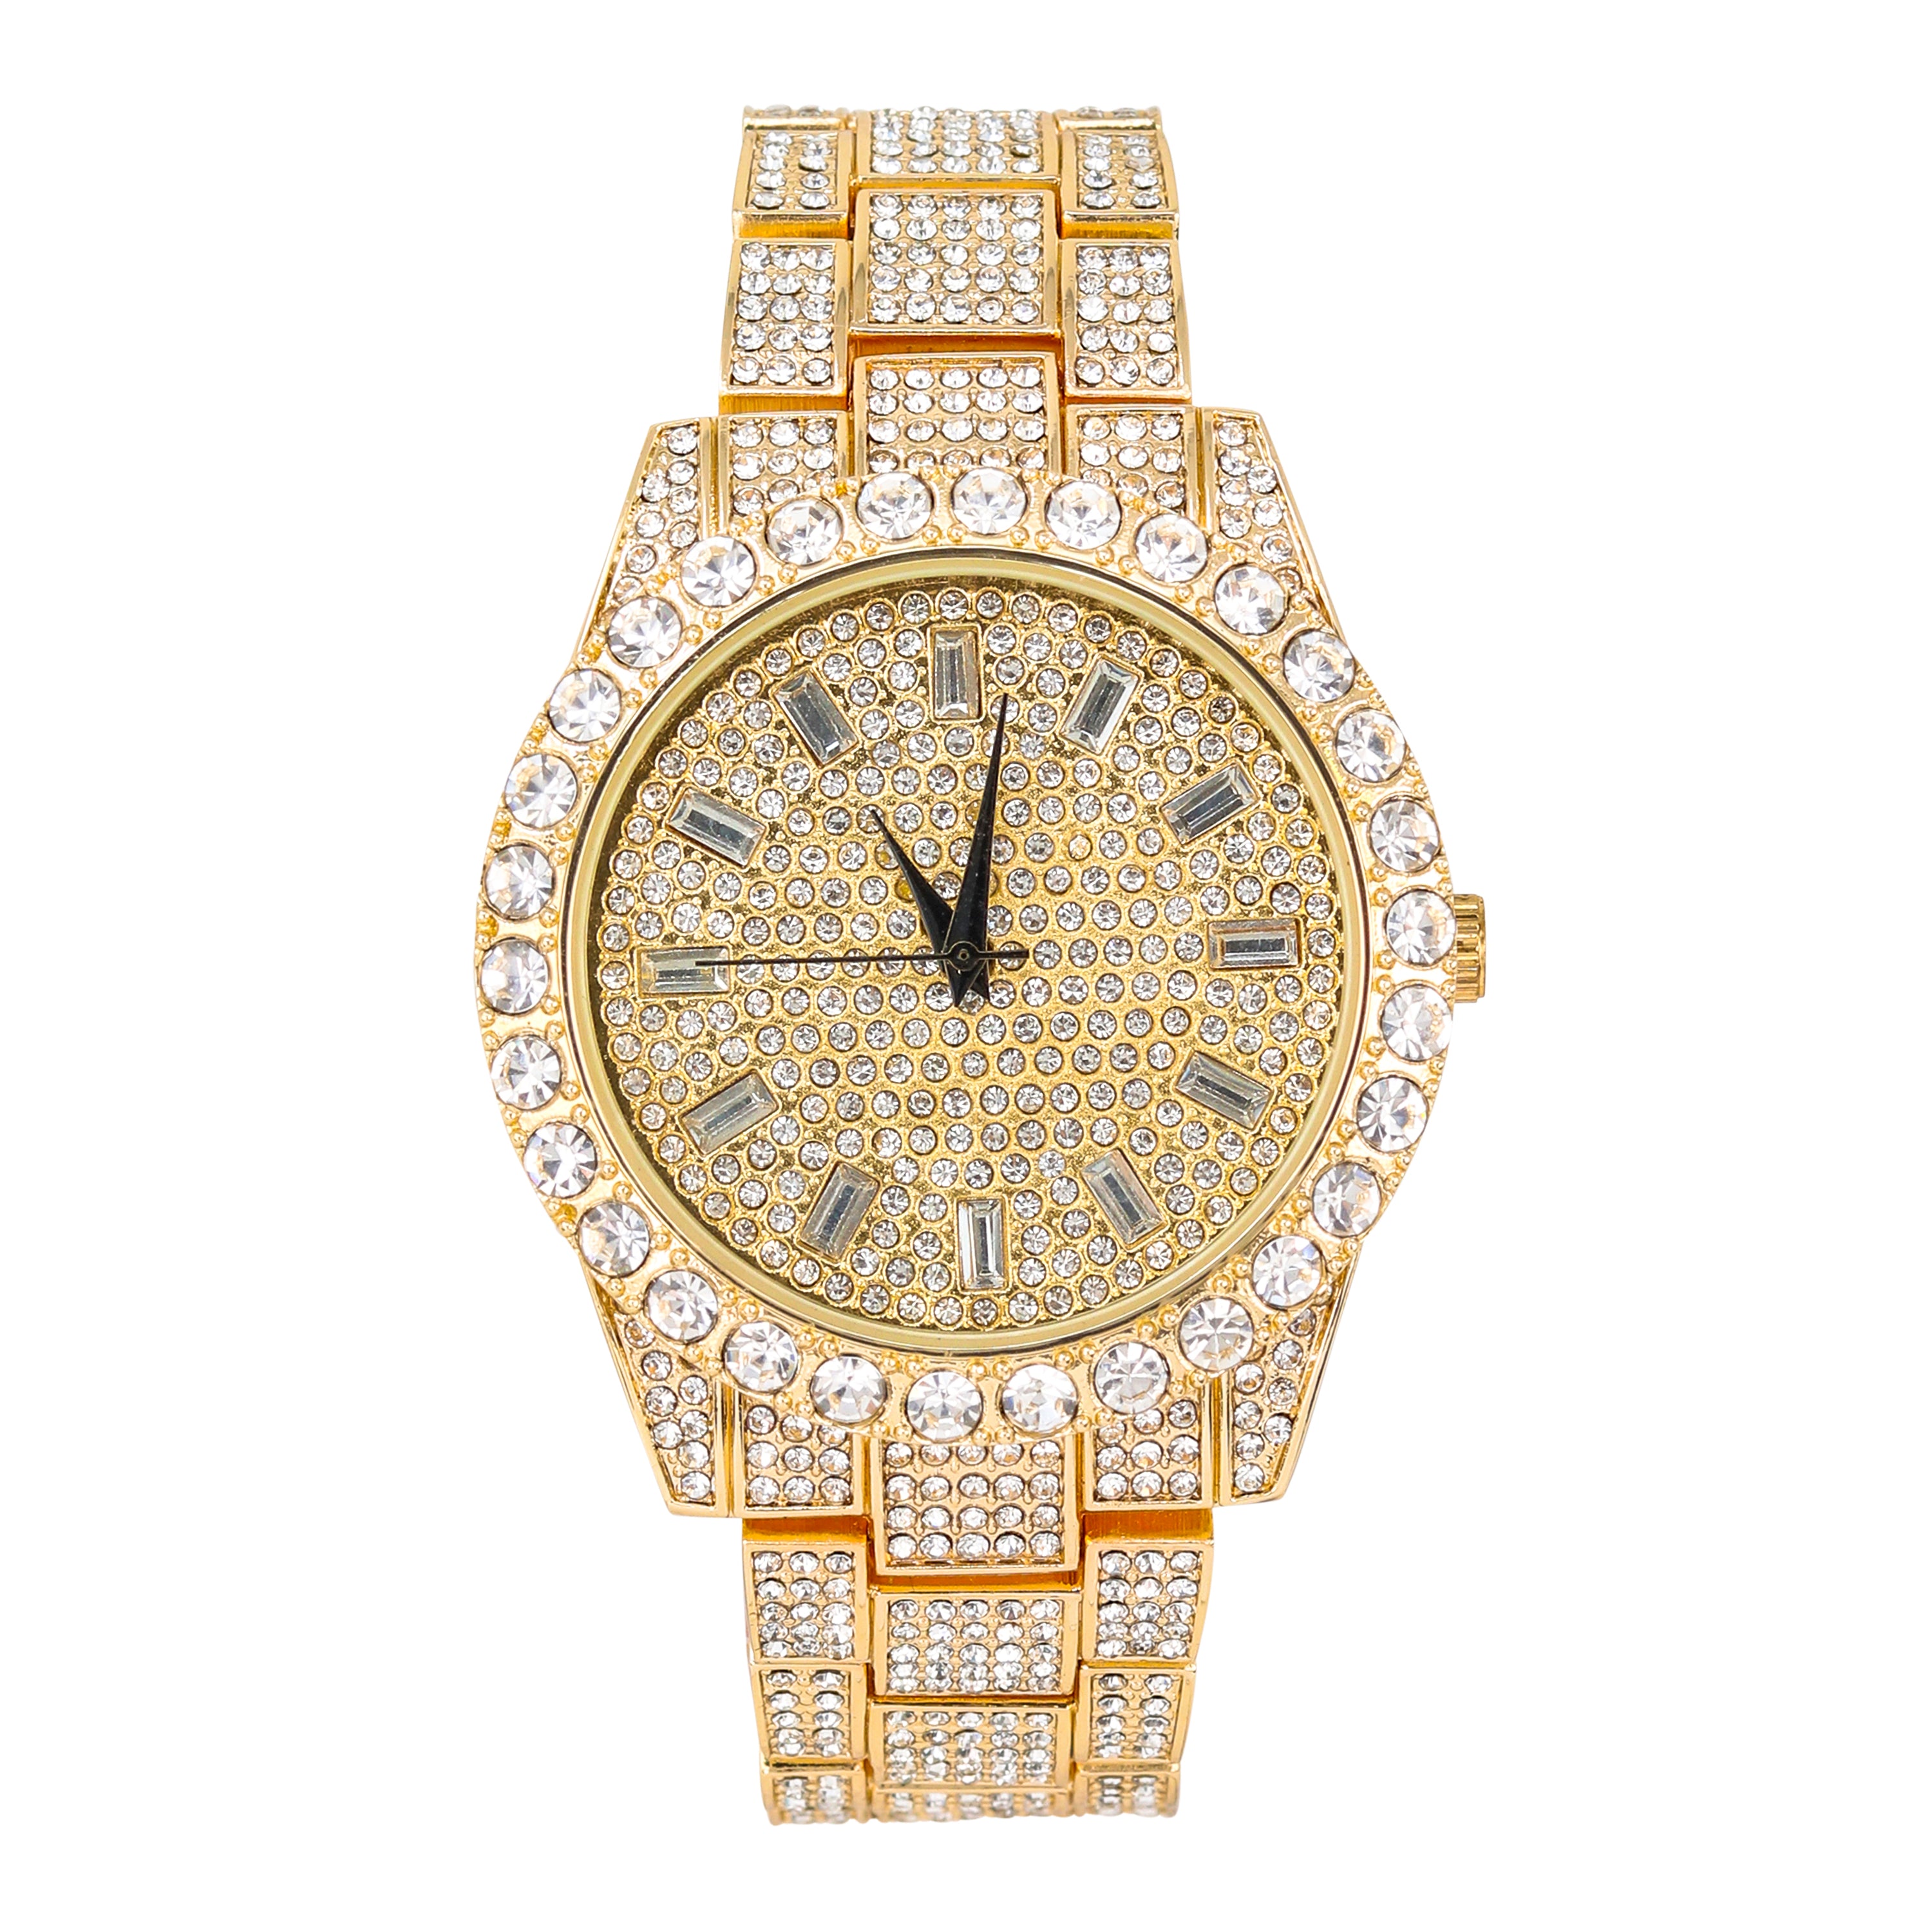 Men's Round Iced Out Watch 44mm Gold - Baguette Dial